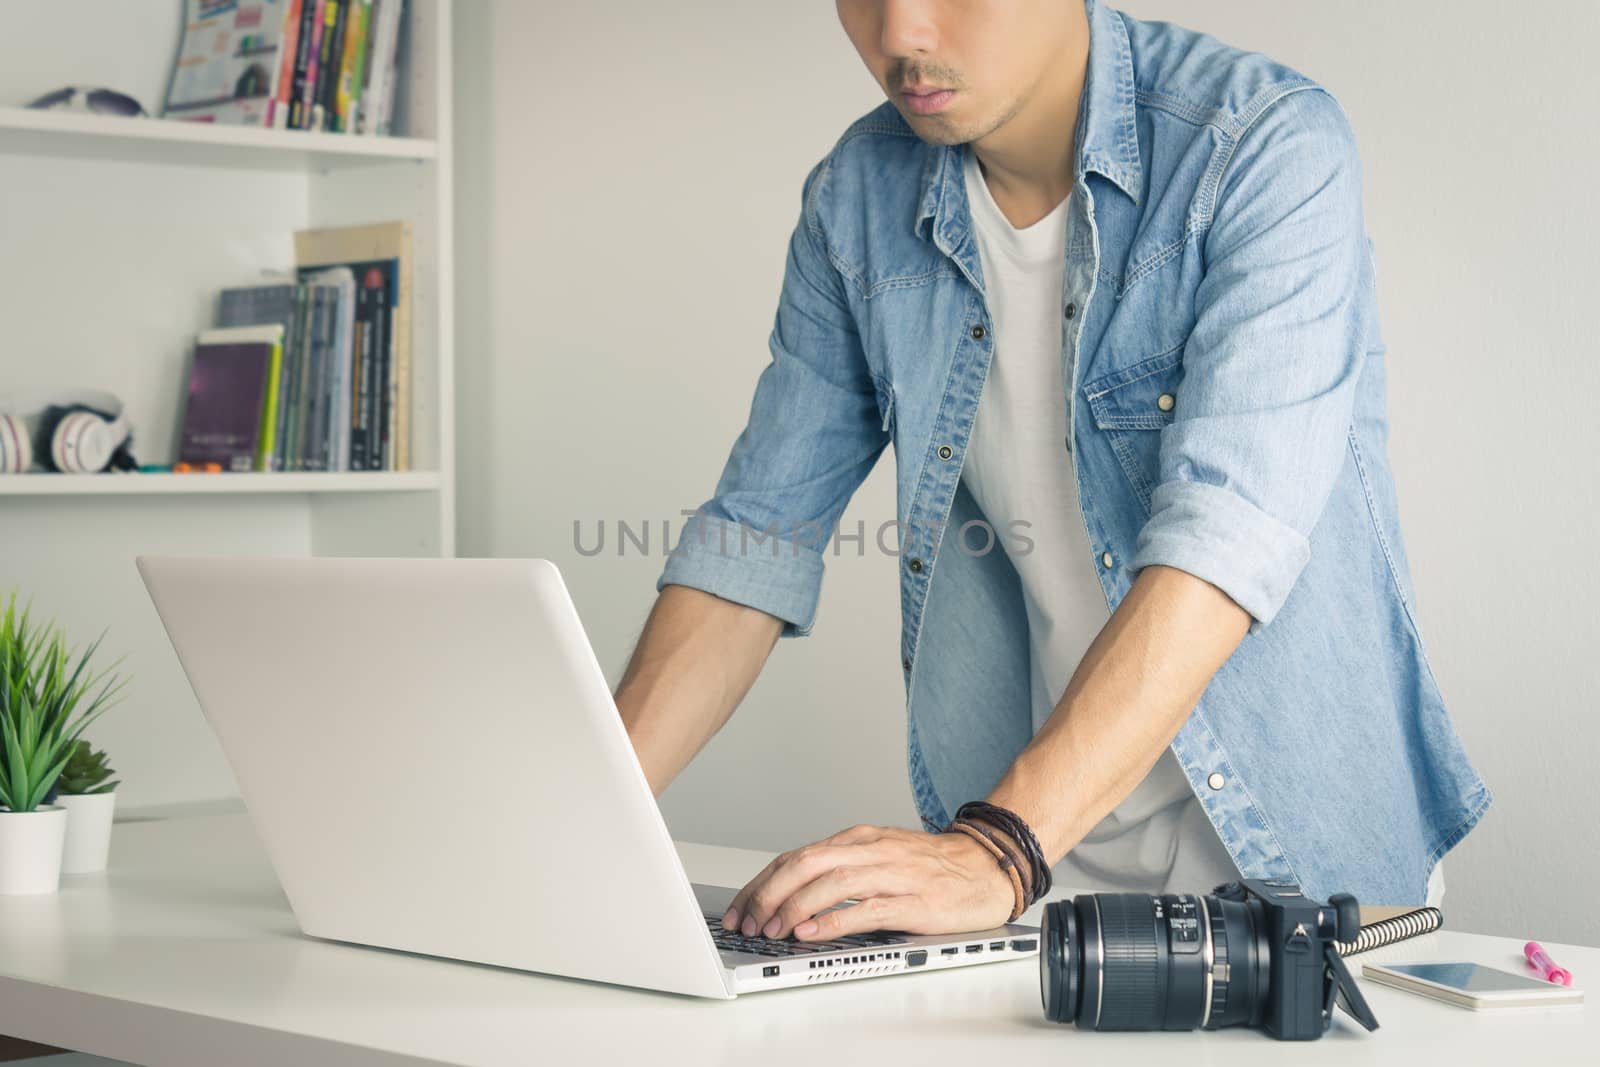 Asian Photographer or Freelancer Working with Laptop in Standing by steafpong